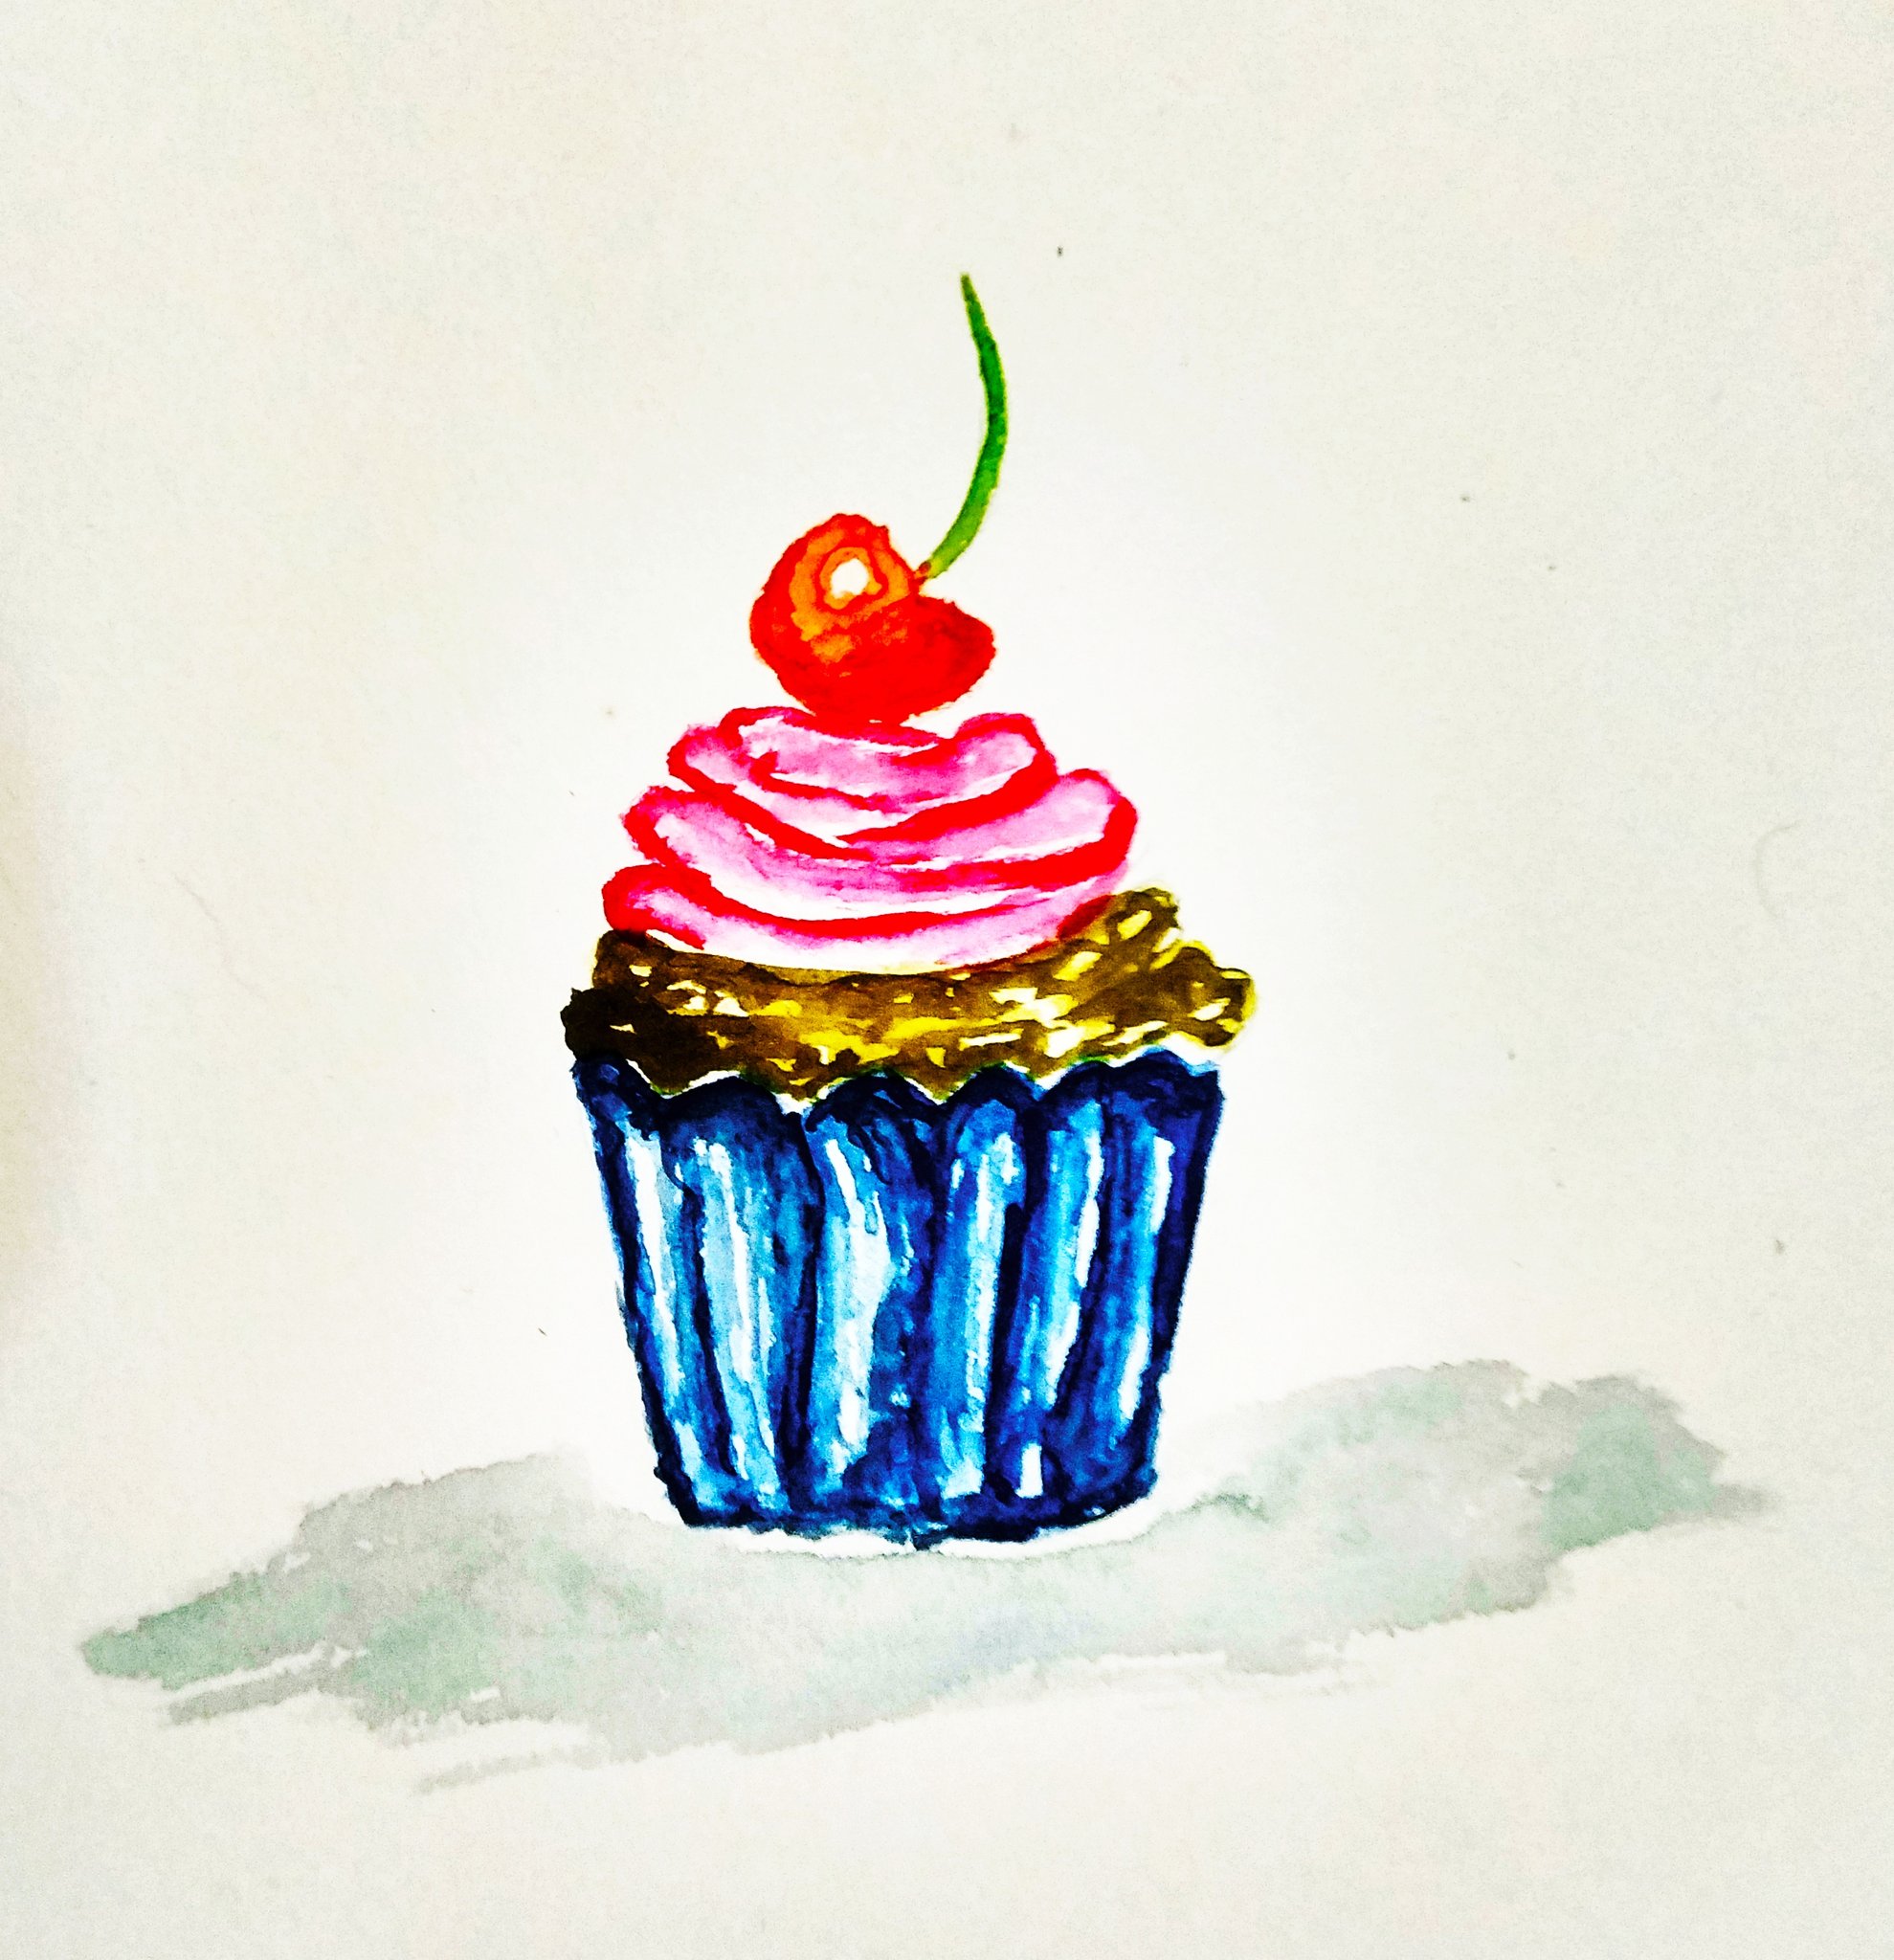 How to Draw a Realistic Cupcake step by step | Pencil Drawing for beginners  - YouTube